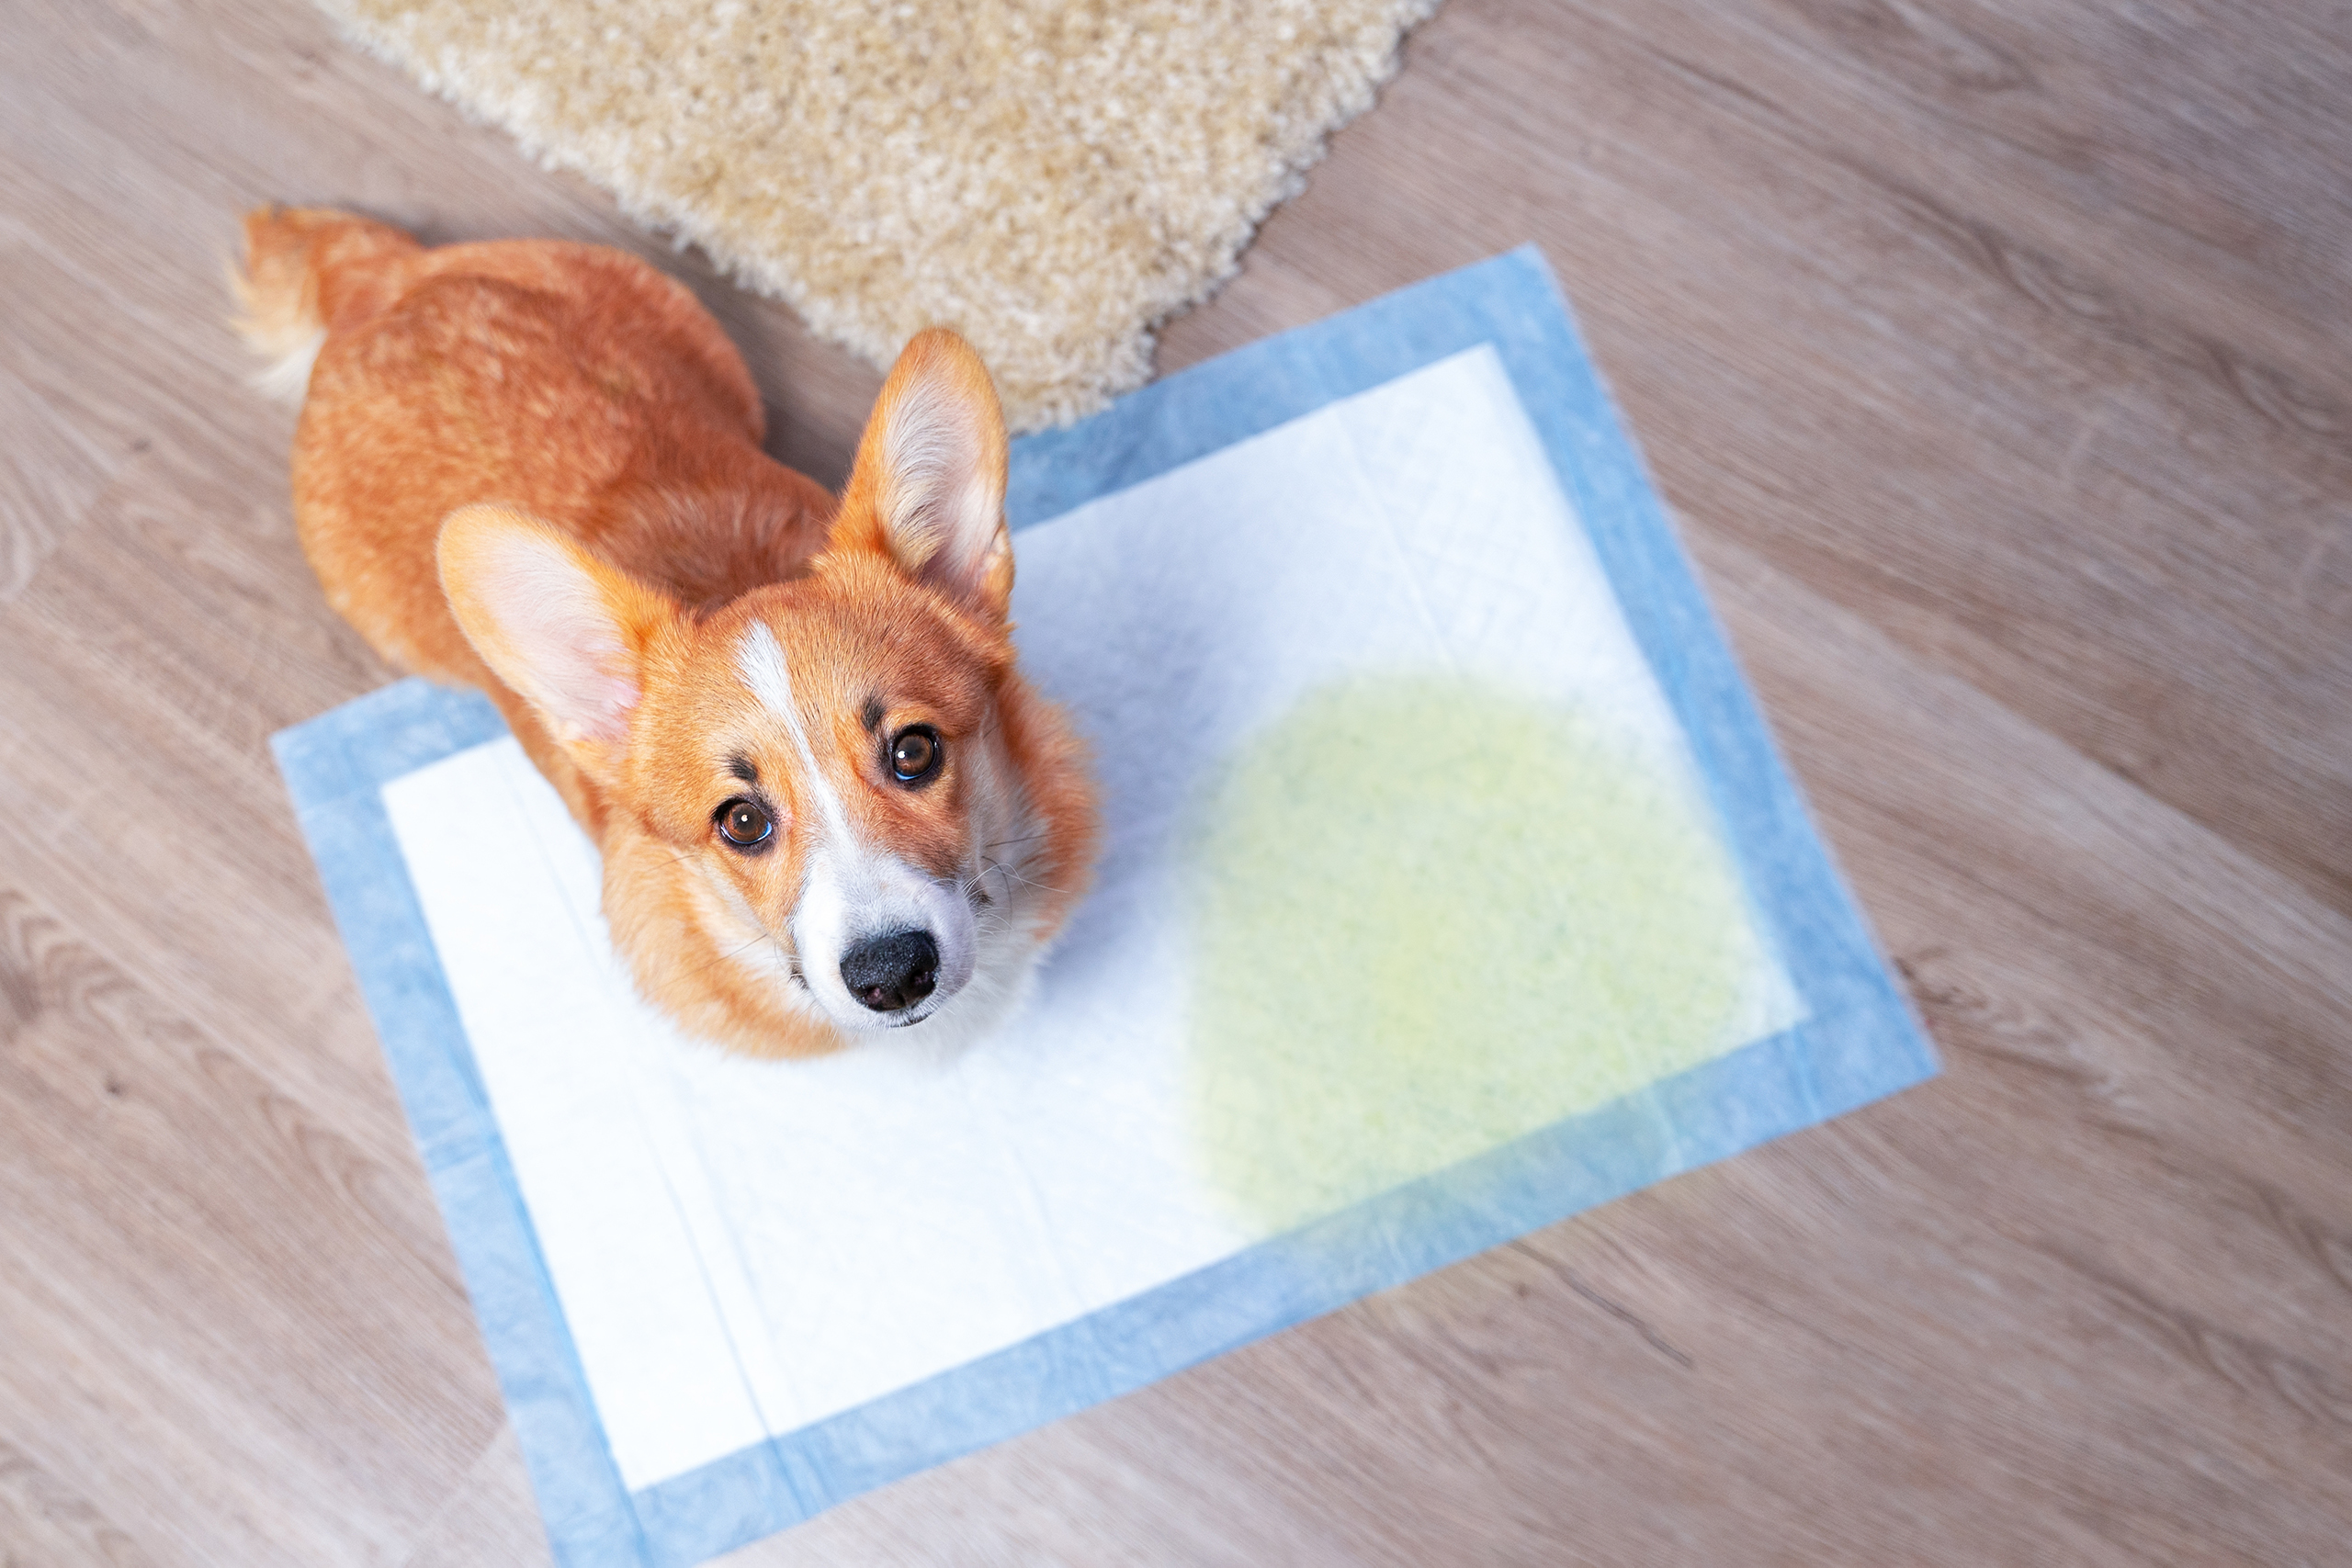 Pet Friendly Flooring: Why LVP Is the Best Choice for Animal Lovers